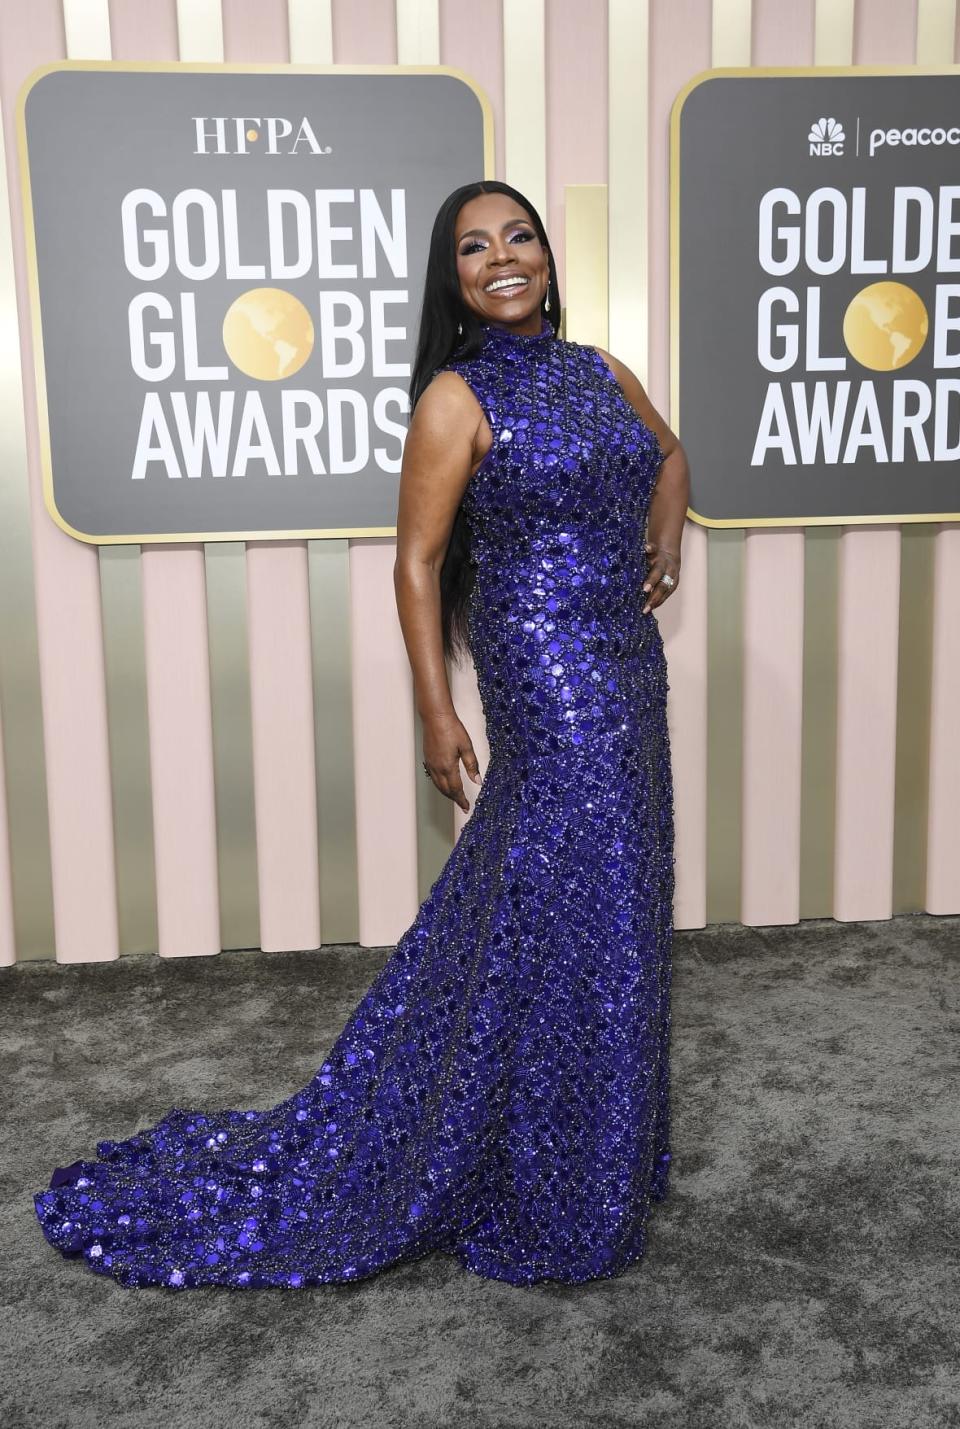 Sheryl Lee Ralph arrives at the 80th Annual Golden Globe Awards held on January 10, 2023, in Beverly Hills, California. — (Photo by Kevork Djansezian/NBC via Getty Images)